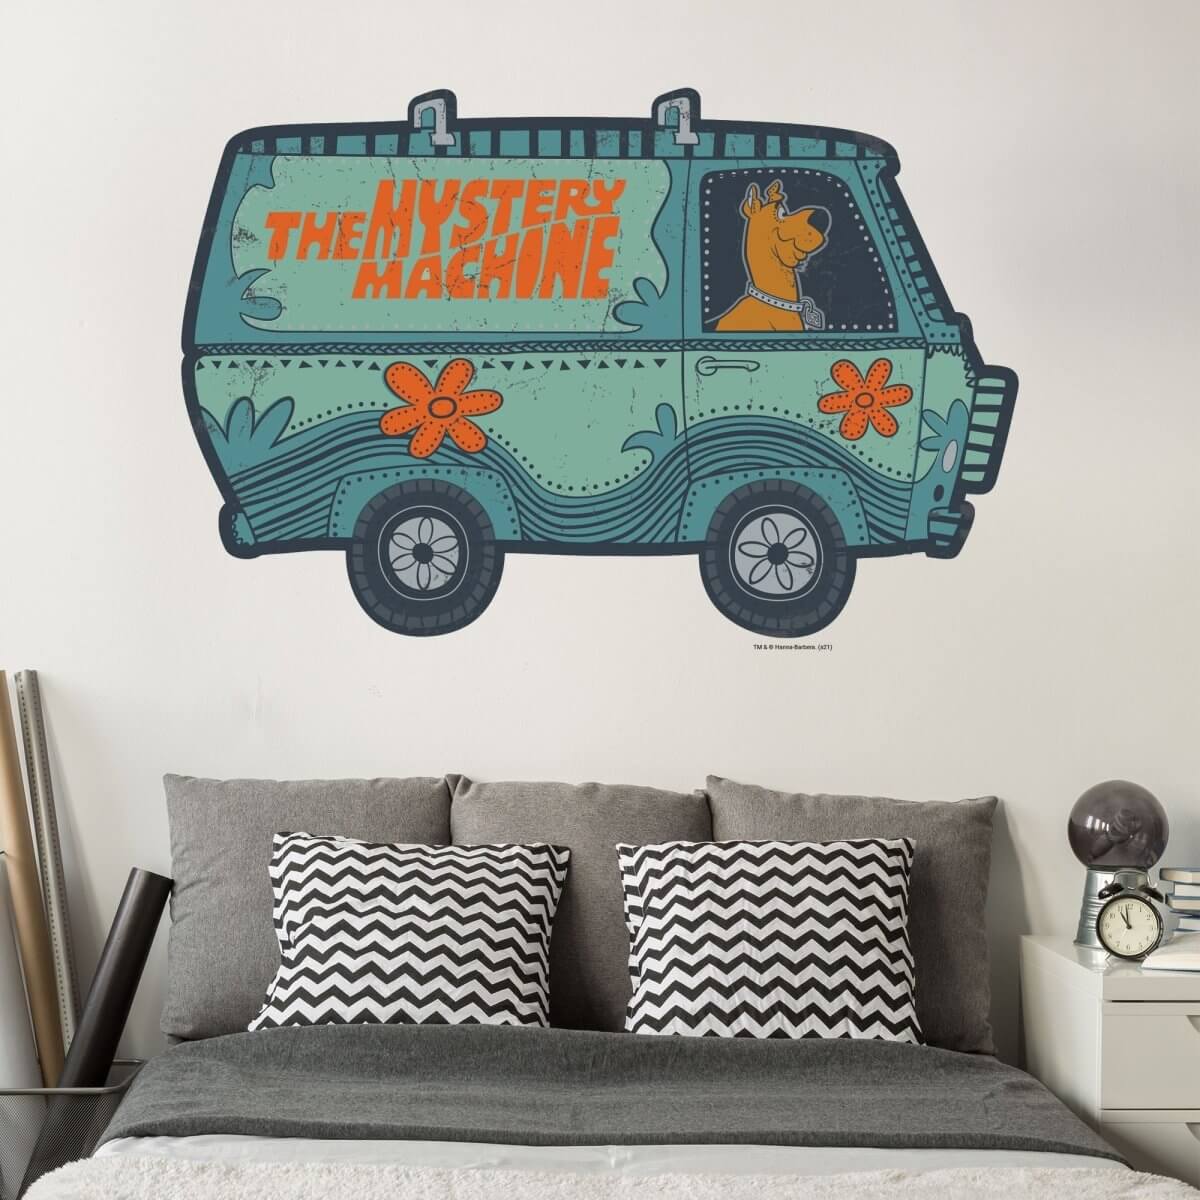 Kismet Decals Home & Room Decor Scooby-Doo and the Mystery Machine Wall decal sticker - officially licensed - latex printed with no solvent odor - Kismet Decals